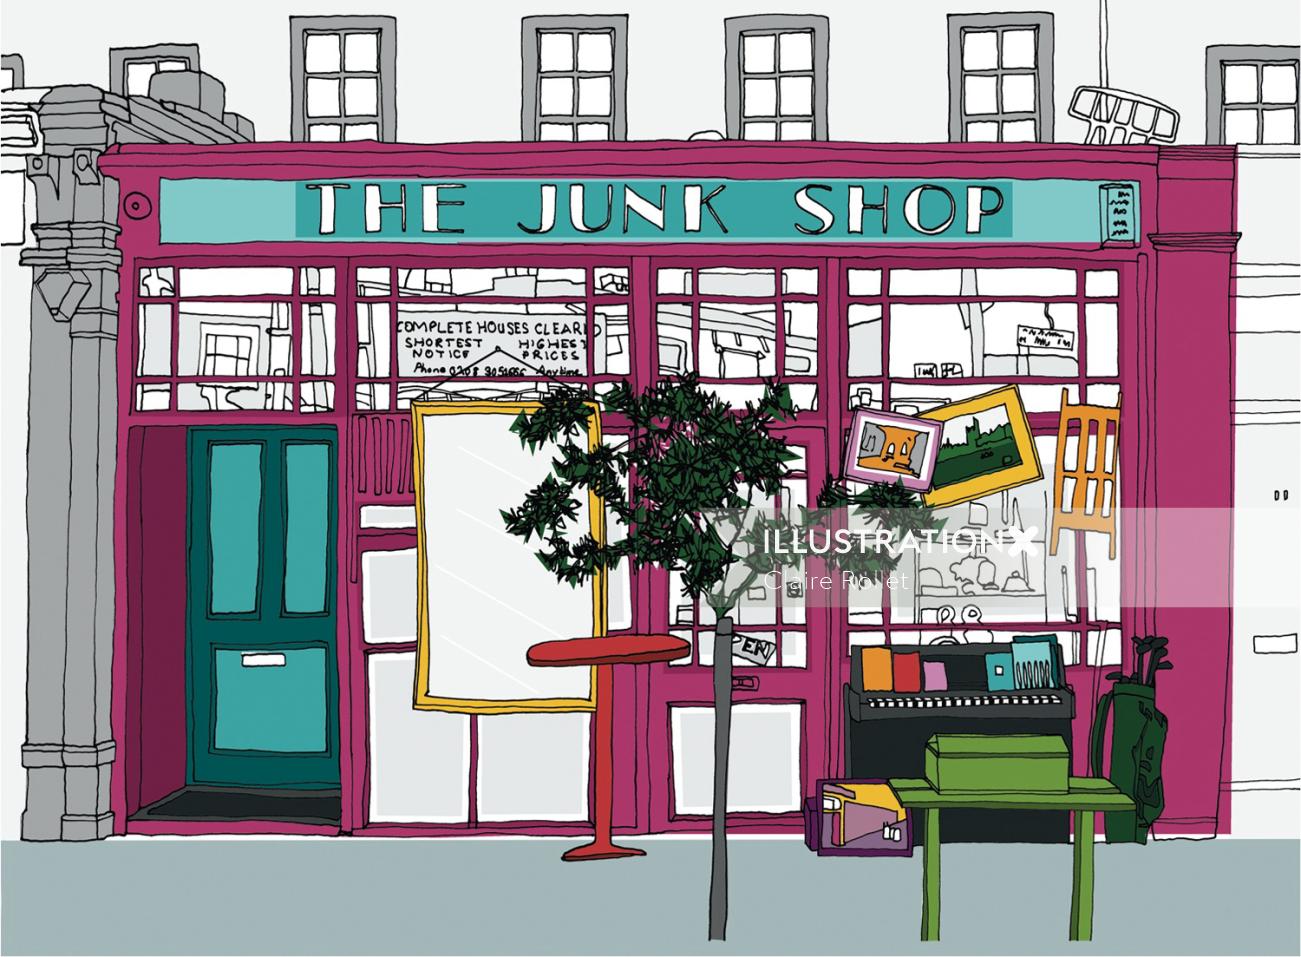 Junk shop in Greenwich illustration by Claire Rollet